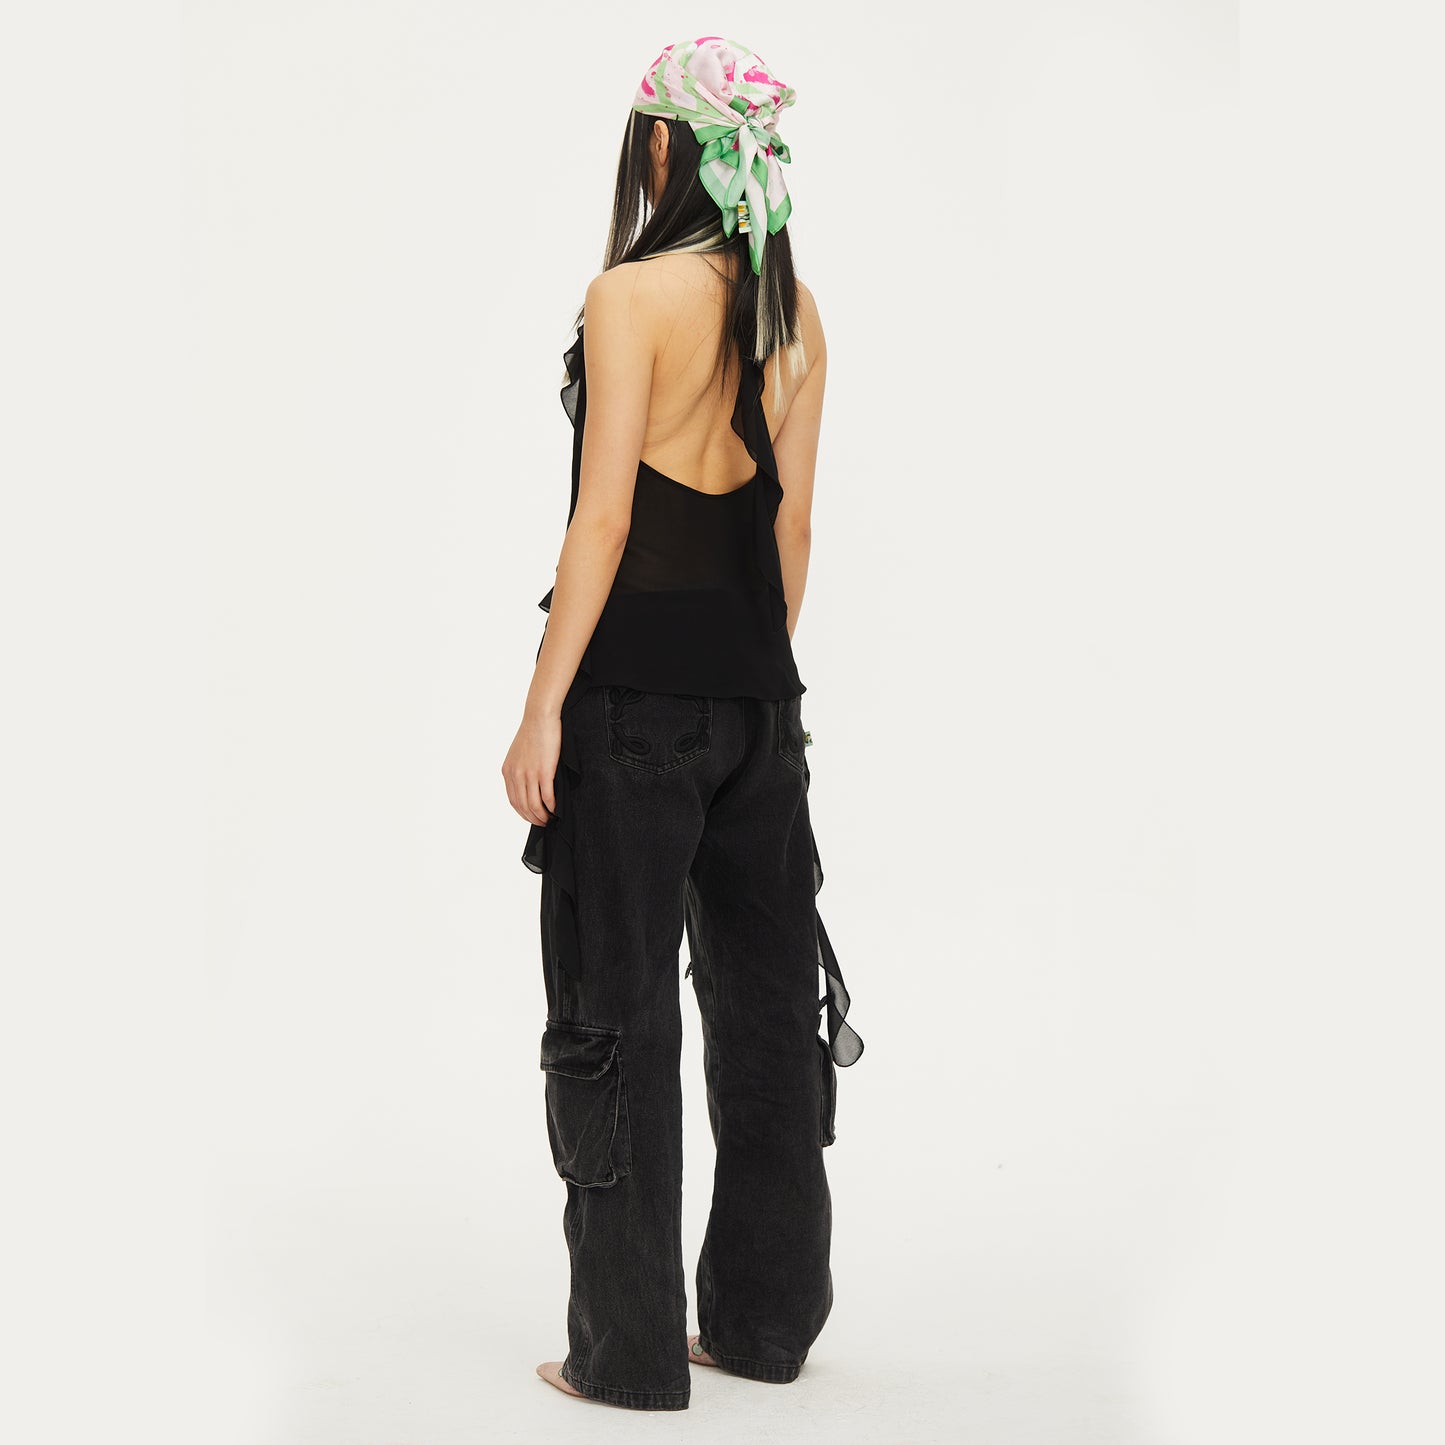 Edith Low-rise Pants in Black